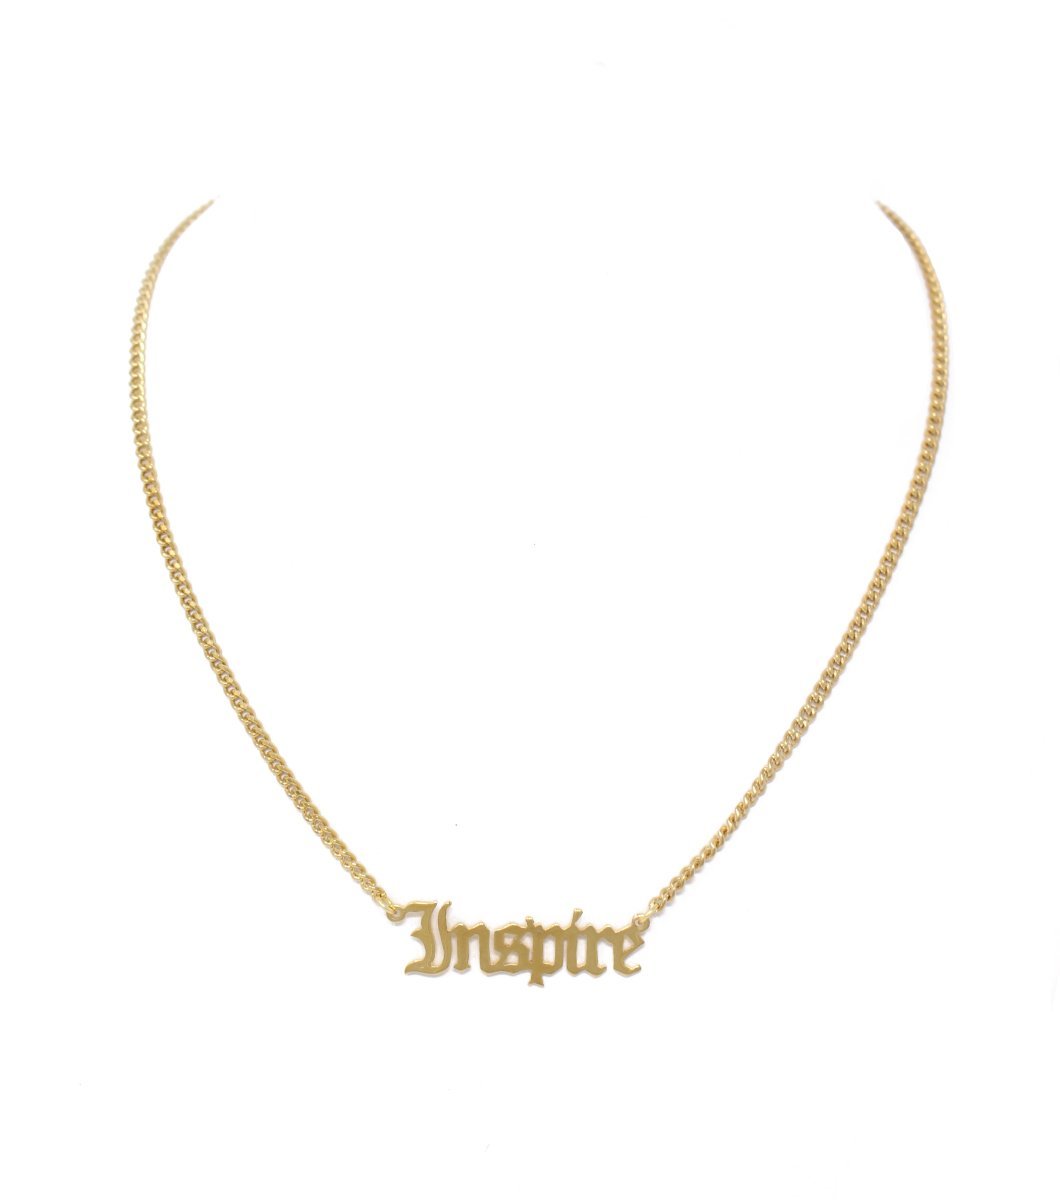 One Self reminder Inspire necklace - Laura Cantu Jewelry - Mx